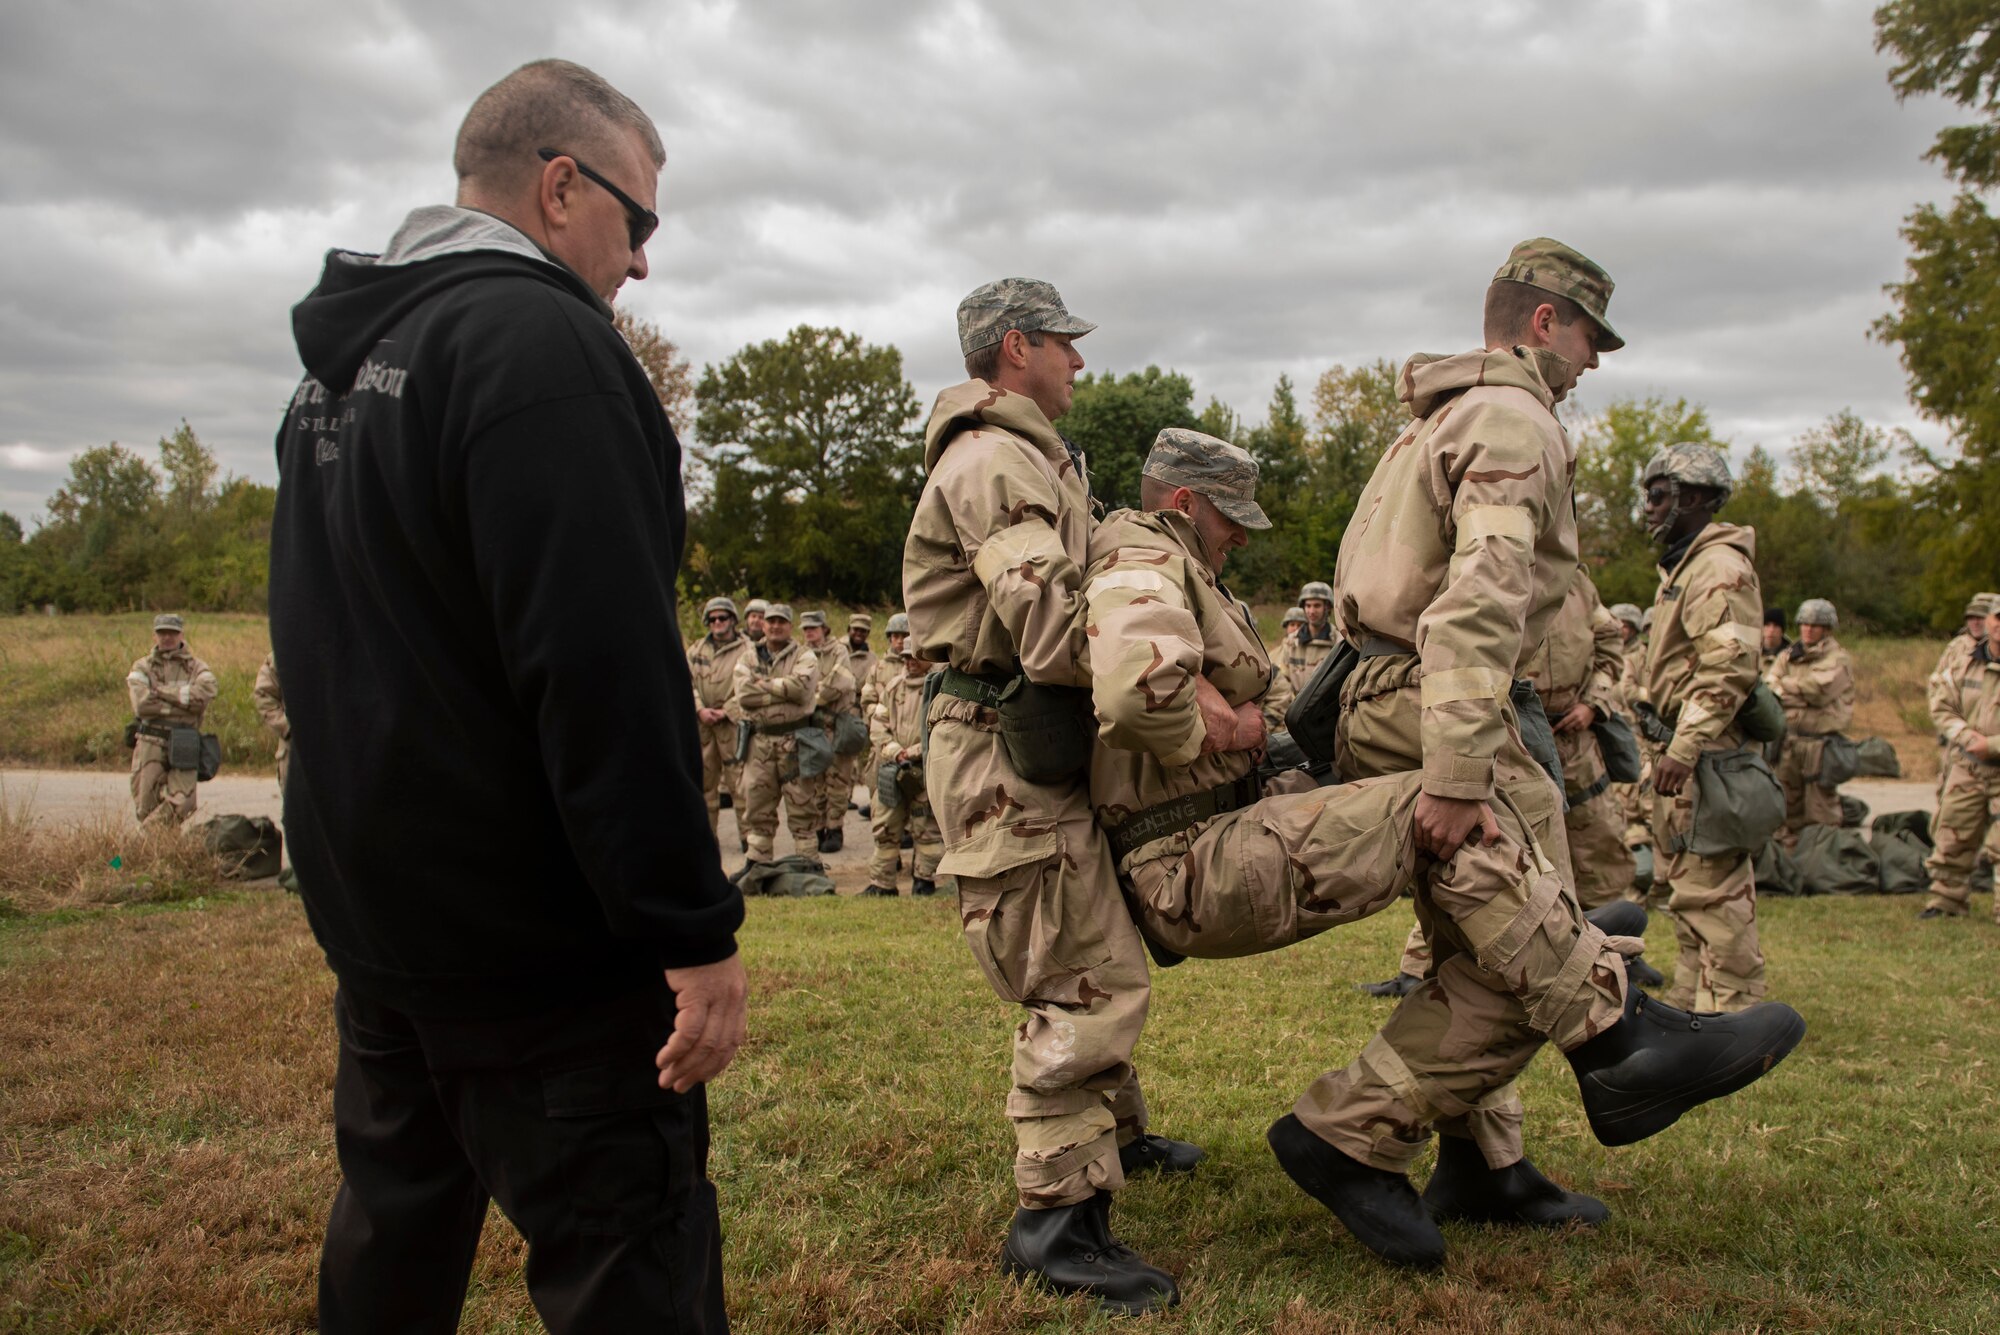 Members of the 375th Air Mobility Wing prepare for a mobility exercise with Ability to Survive and Operate training at Scott Air Force Base, Illinois, Oct. 16, 2019. ATSO training includes elements of Tactical Combat Casualty Care, chemical, biological, radiological, and nuclear defense, Post Attack Reconnaissance sweeps, Unidentified Explosive Ordnance response, and other areas. (U.S. Air Force photo by Senior Airman Daniel Garcia)